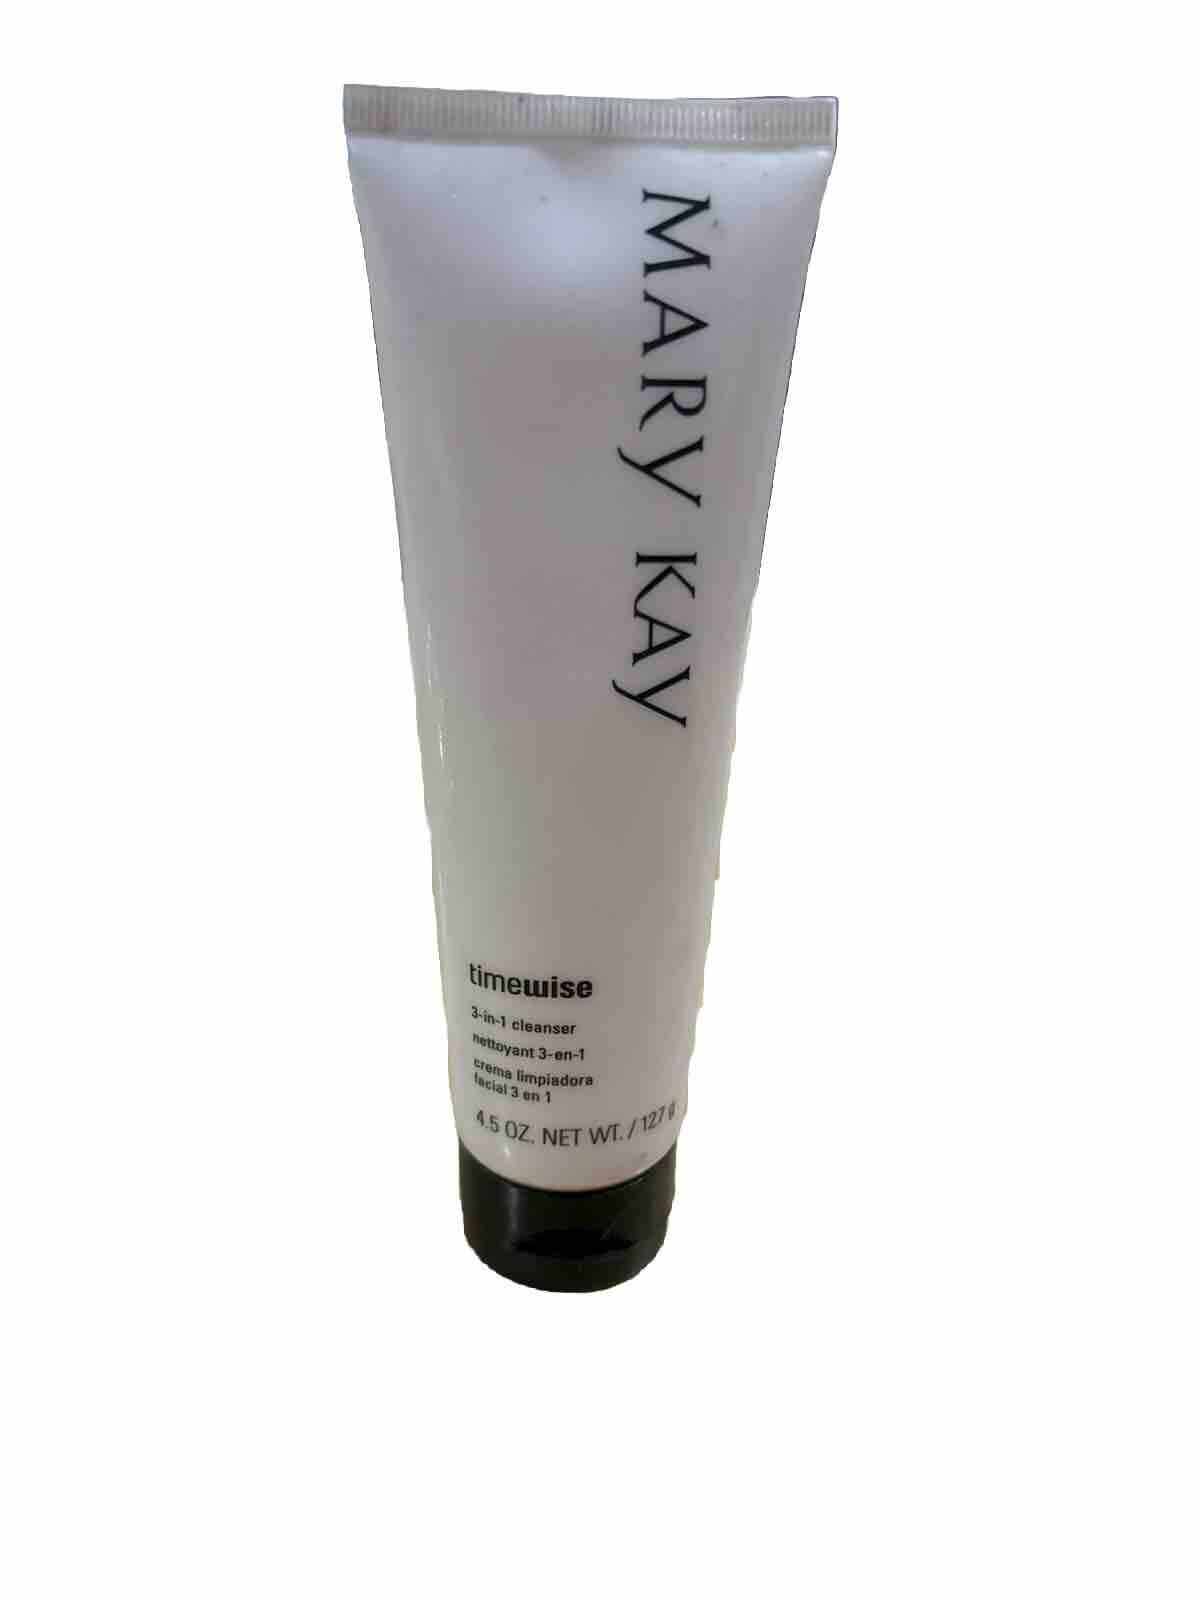 Mary Kay TimeWise 3-in-1 Cleanser Normal to Dry New No Box 50% full